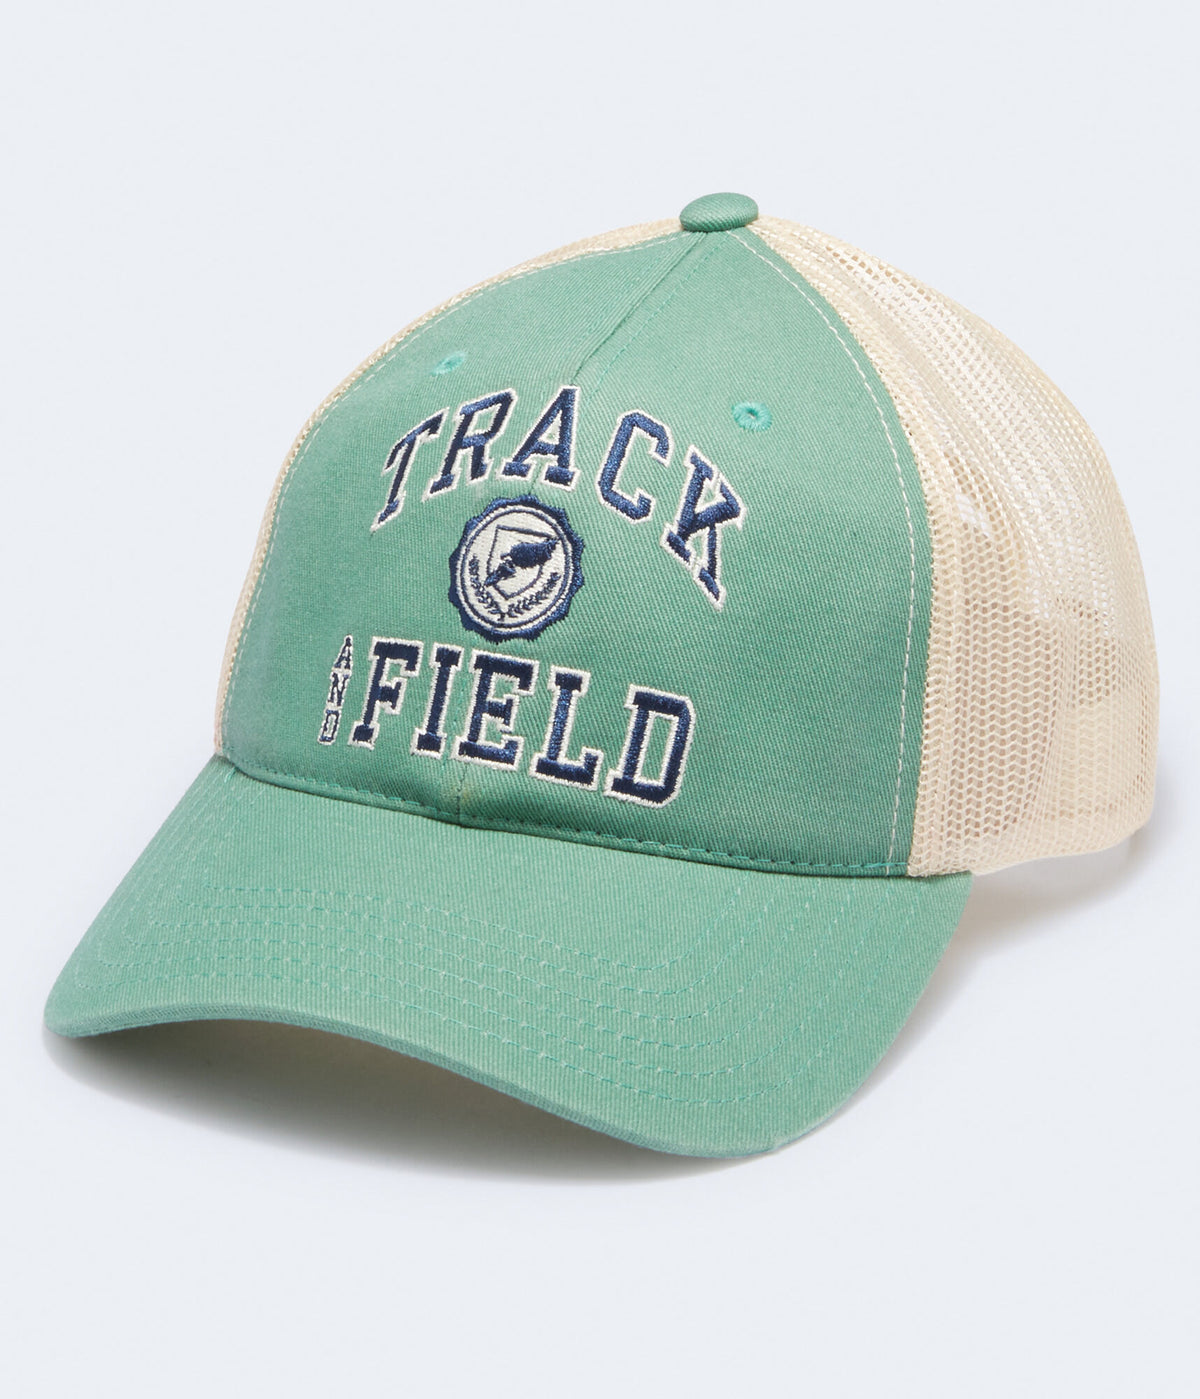 Aeropostale Mens' Track And Field Adjustable Trucker Hat -  - Size One Size - Cotton - Teen Fashion & Clothing Green